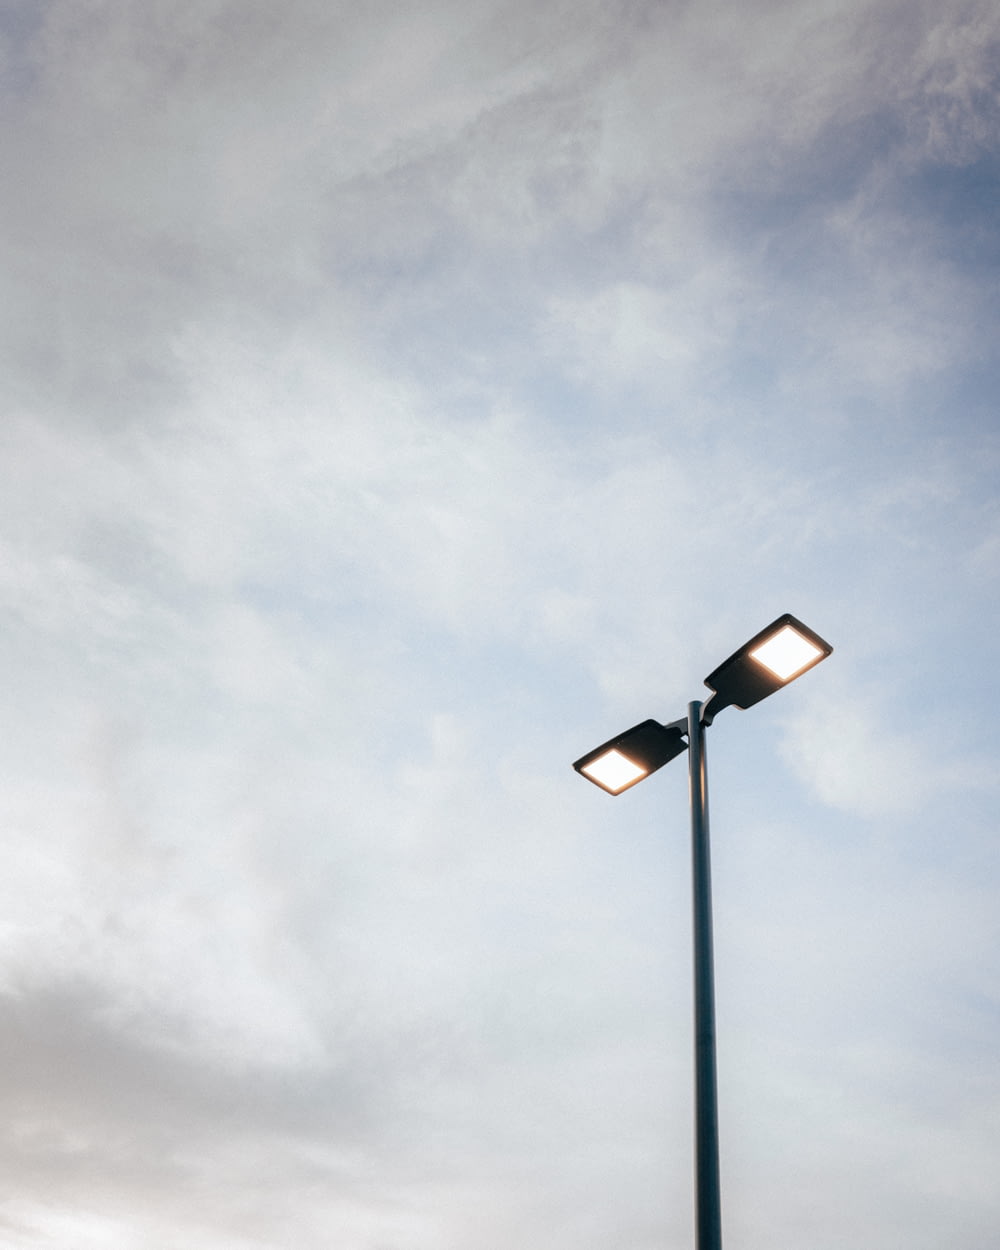 a street light with a cloudy sky in the background